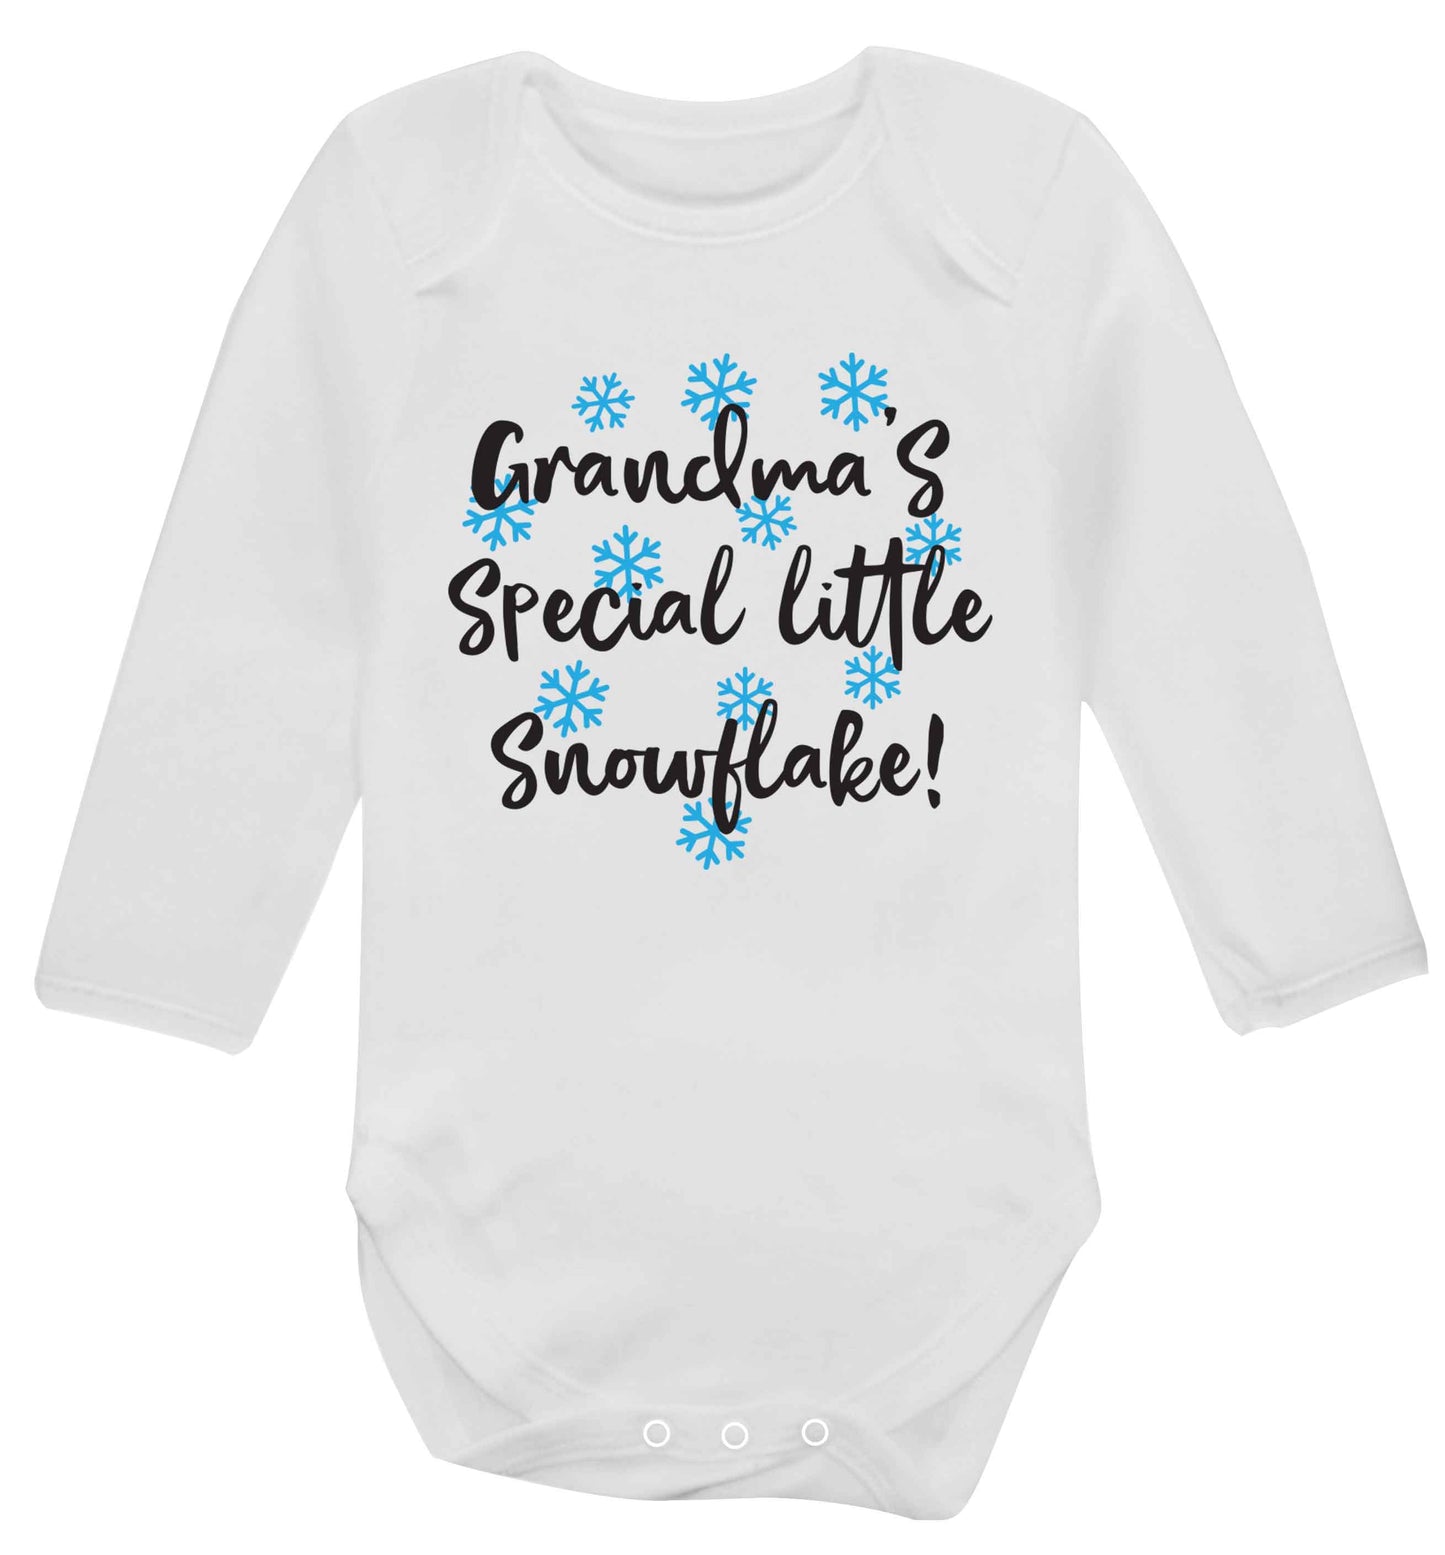 Grandma's special little snowflake Baby Vest long sleeved white 6-12 months